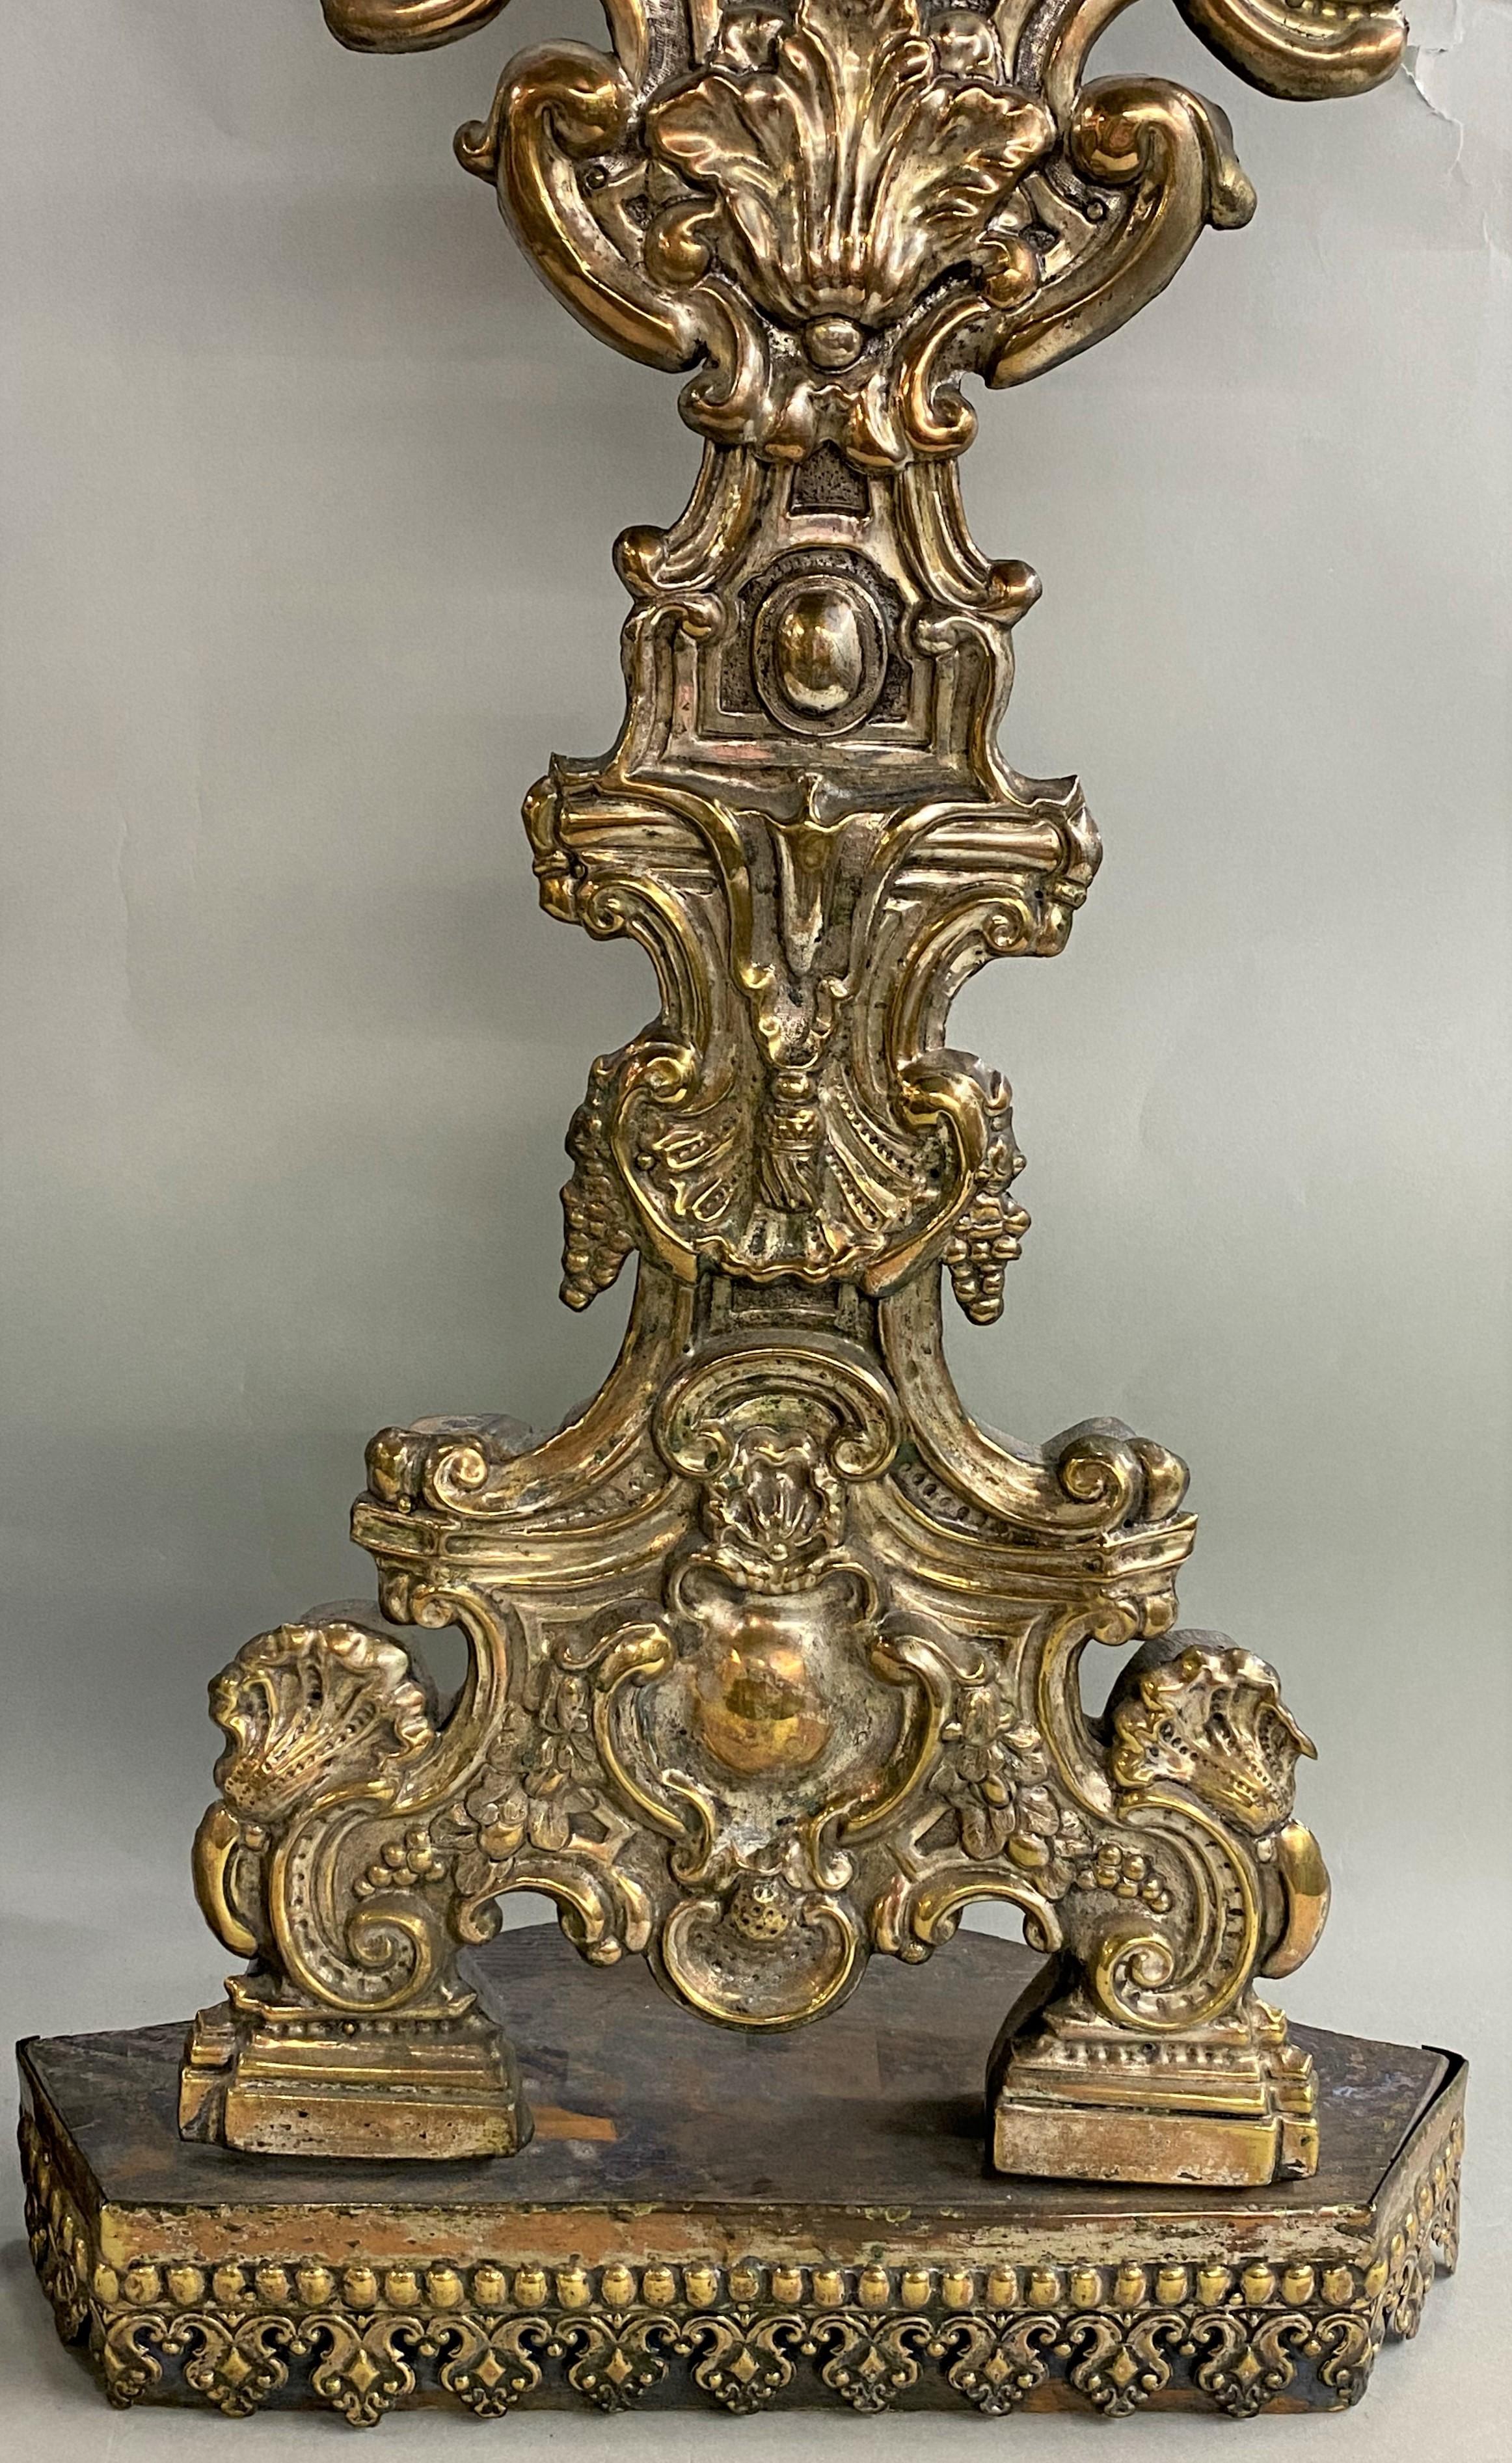 18th Century Large Pair of 18th / 19th Century Italian Silvered Reliquaries For Sale